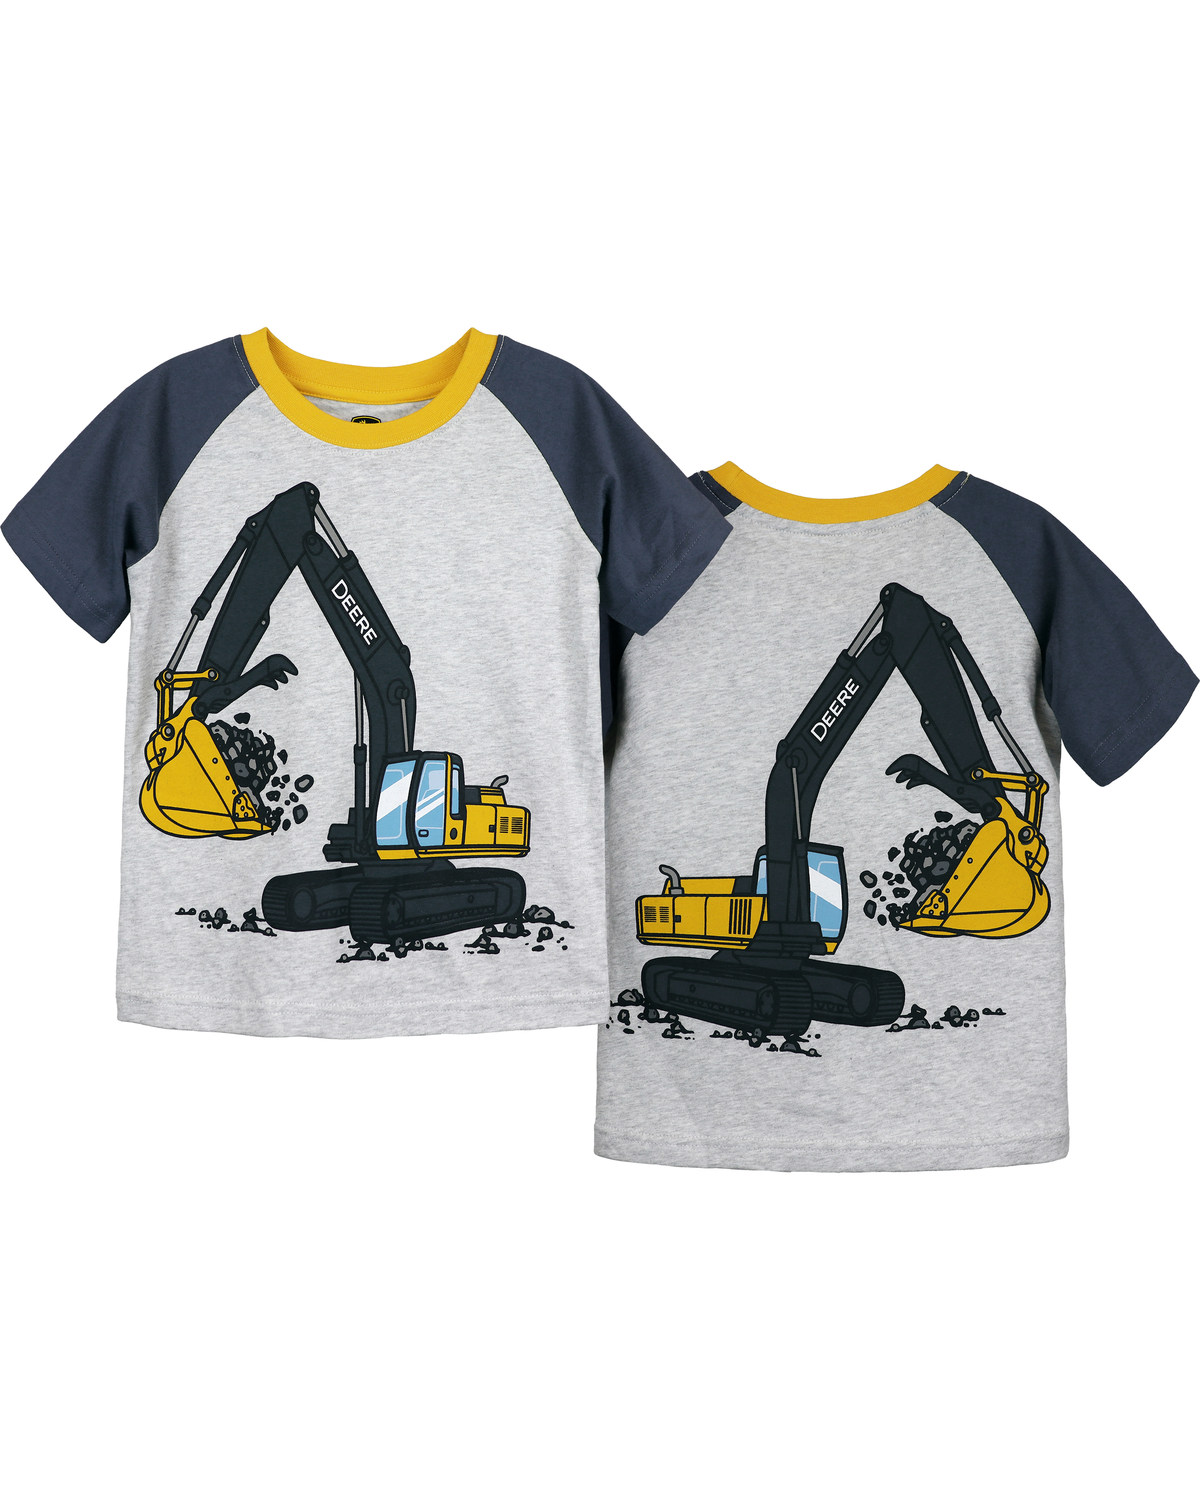 John Deere Toddler Boys' Coming and Going Short Sleeve Graphic T-Shirt